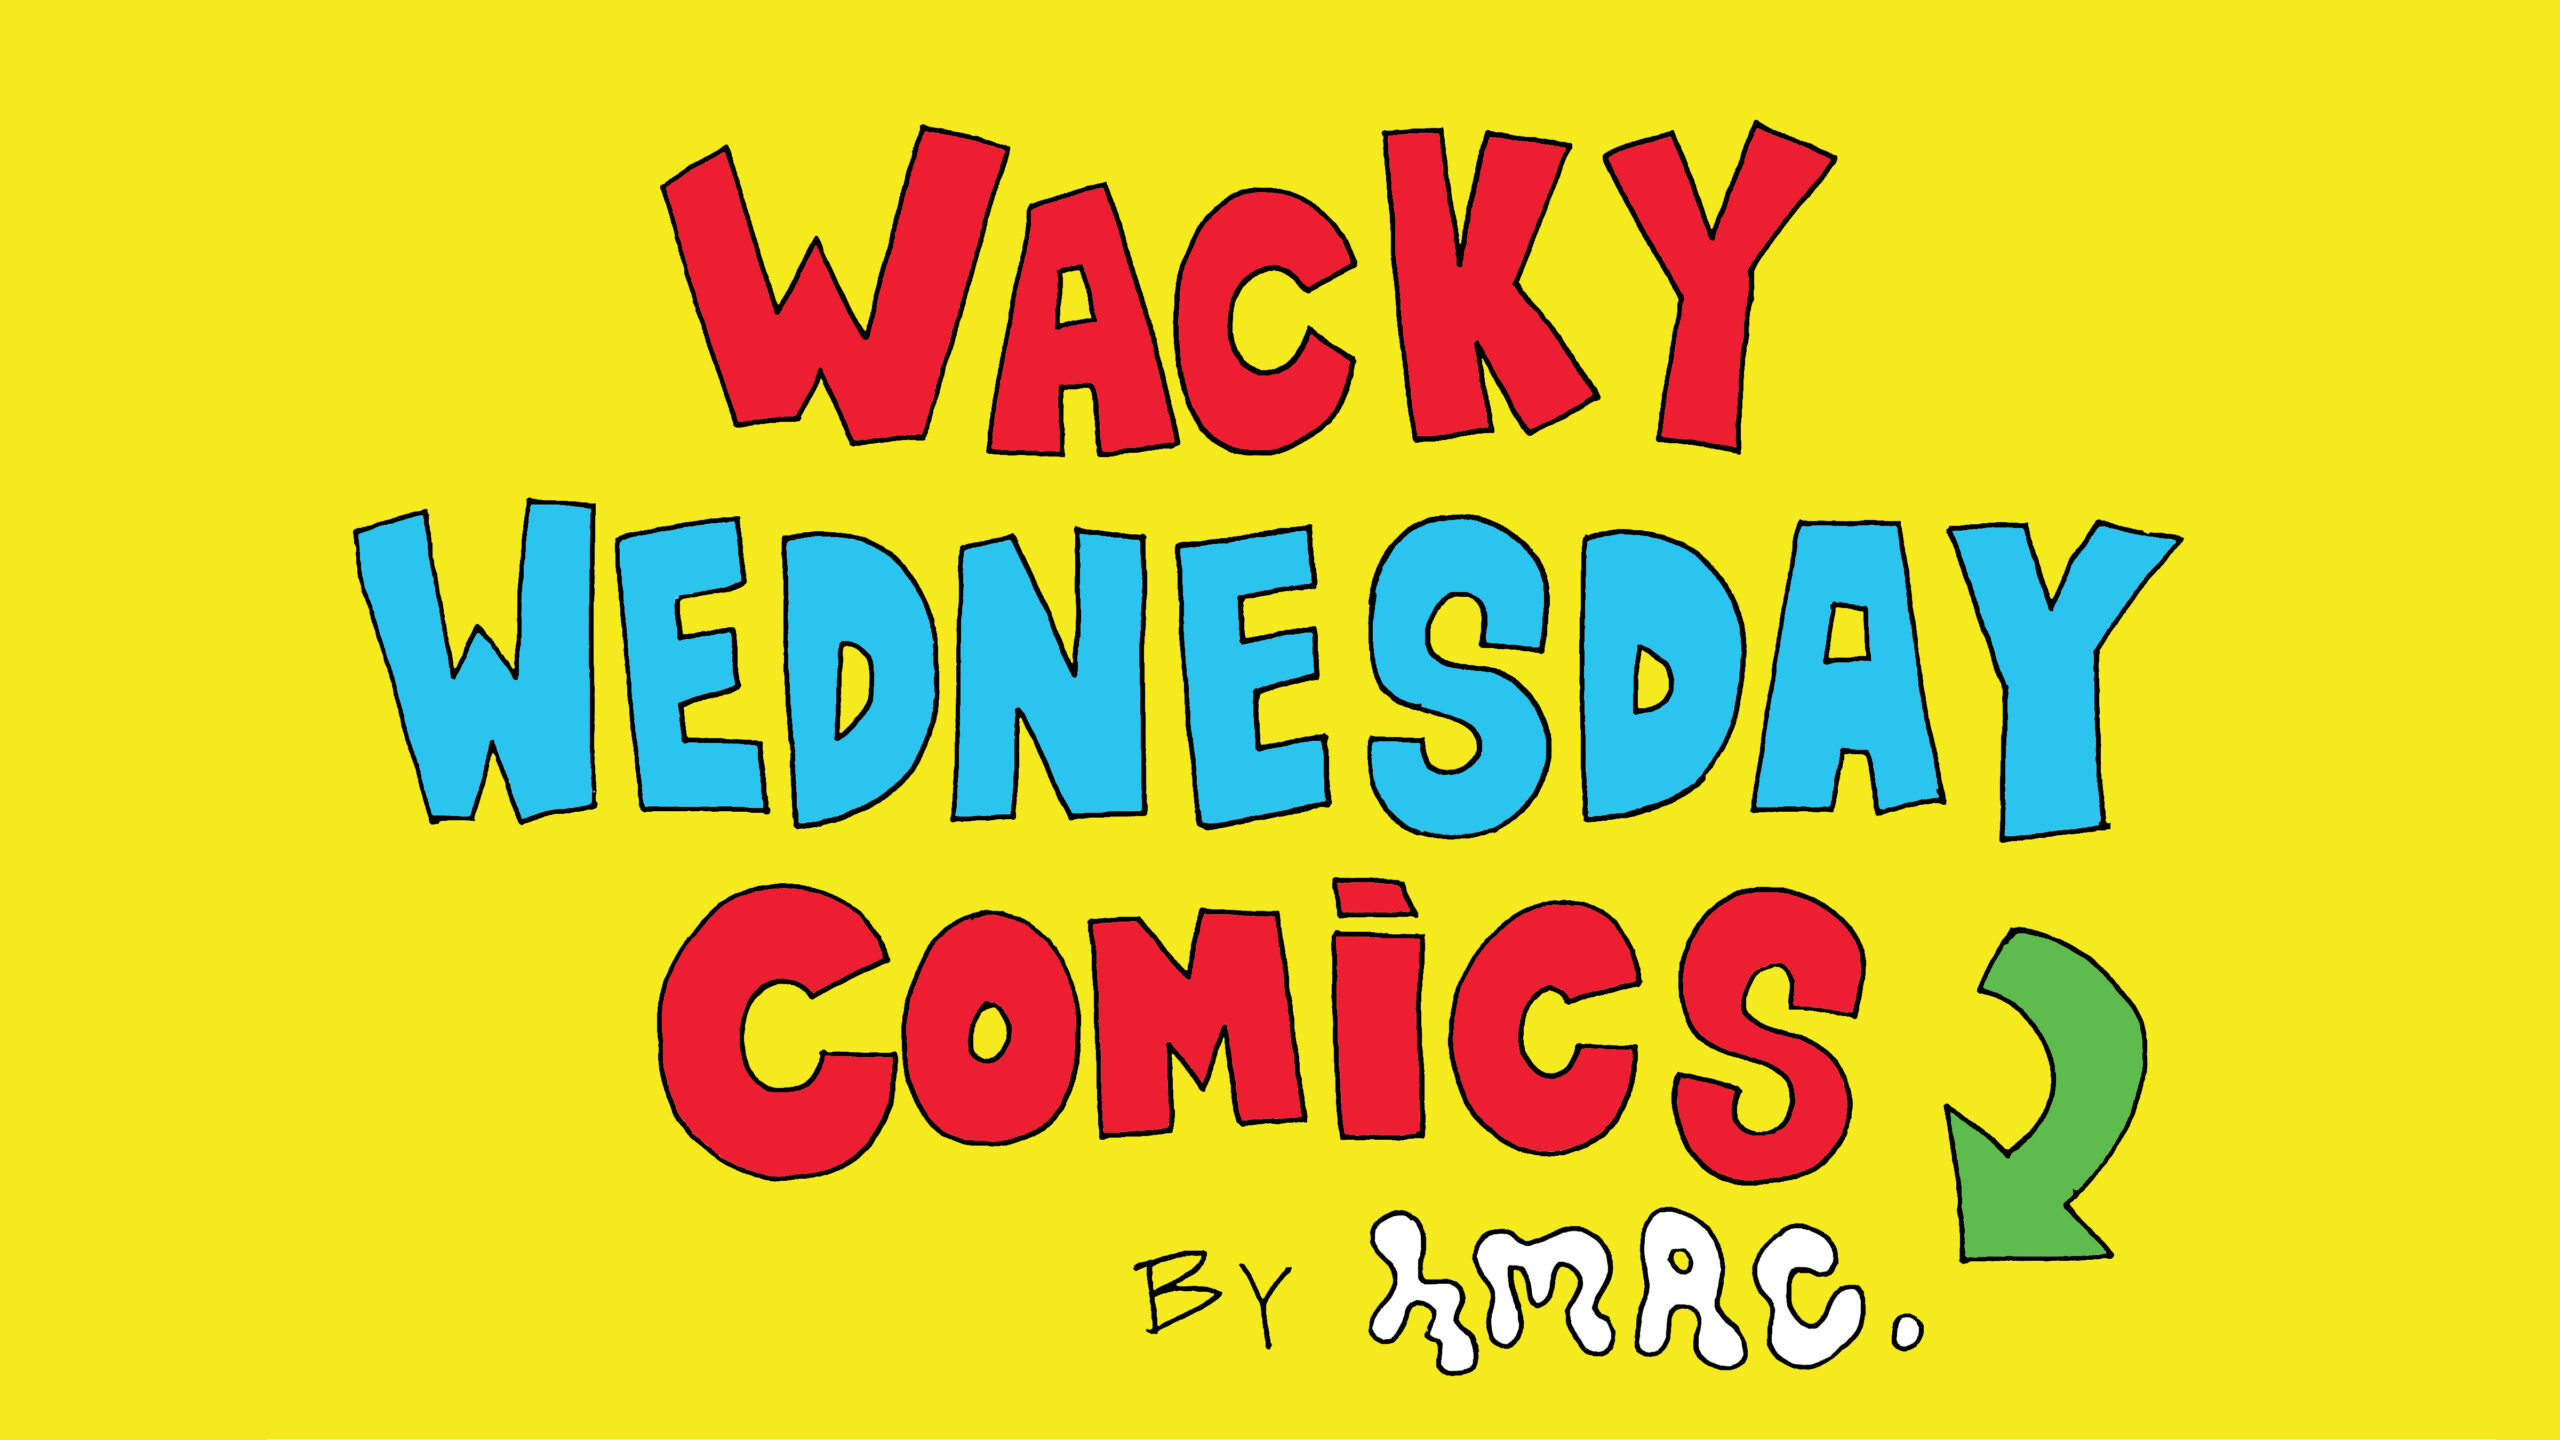 Yellow background with red and blue lettering reading "Wacky Wednesday Comics by Hmac"